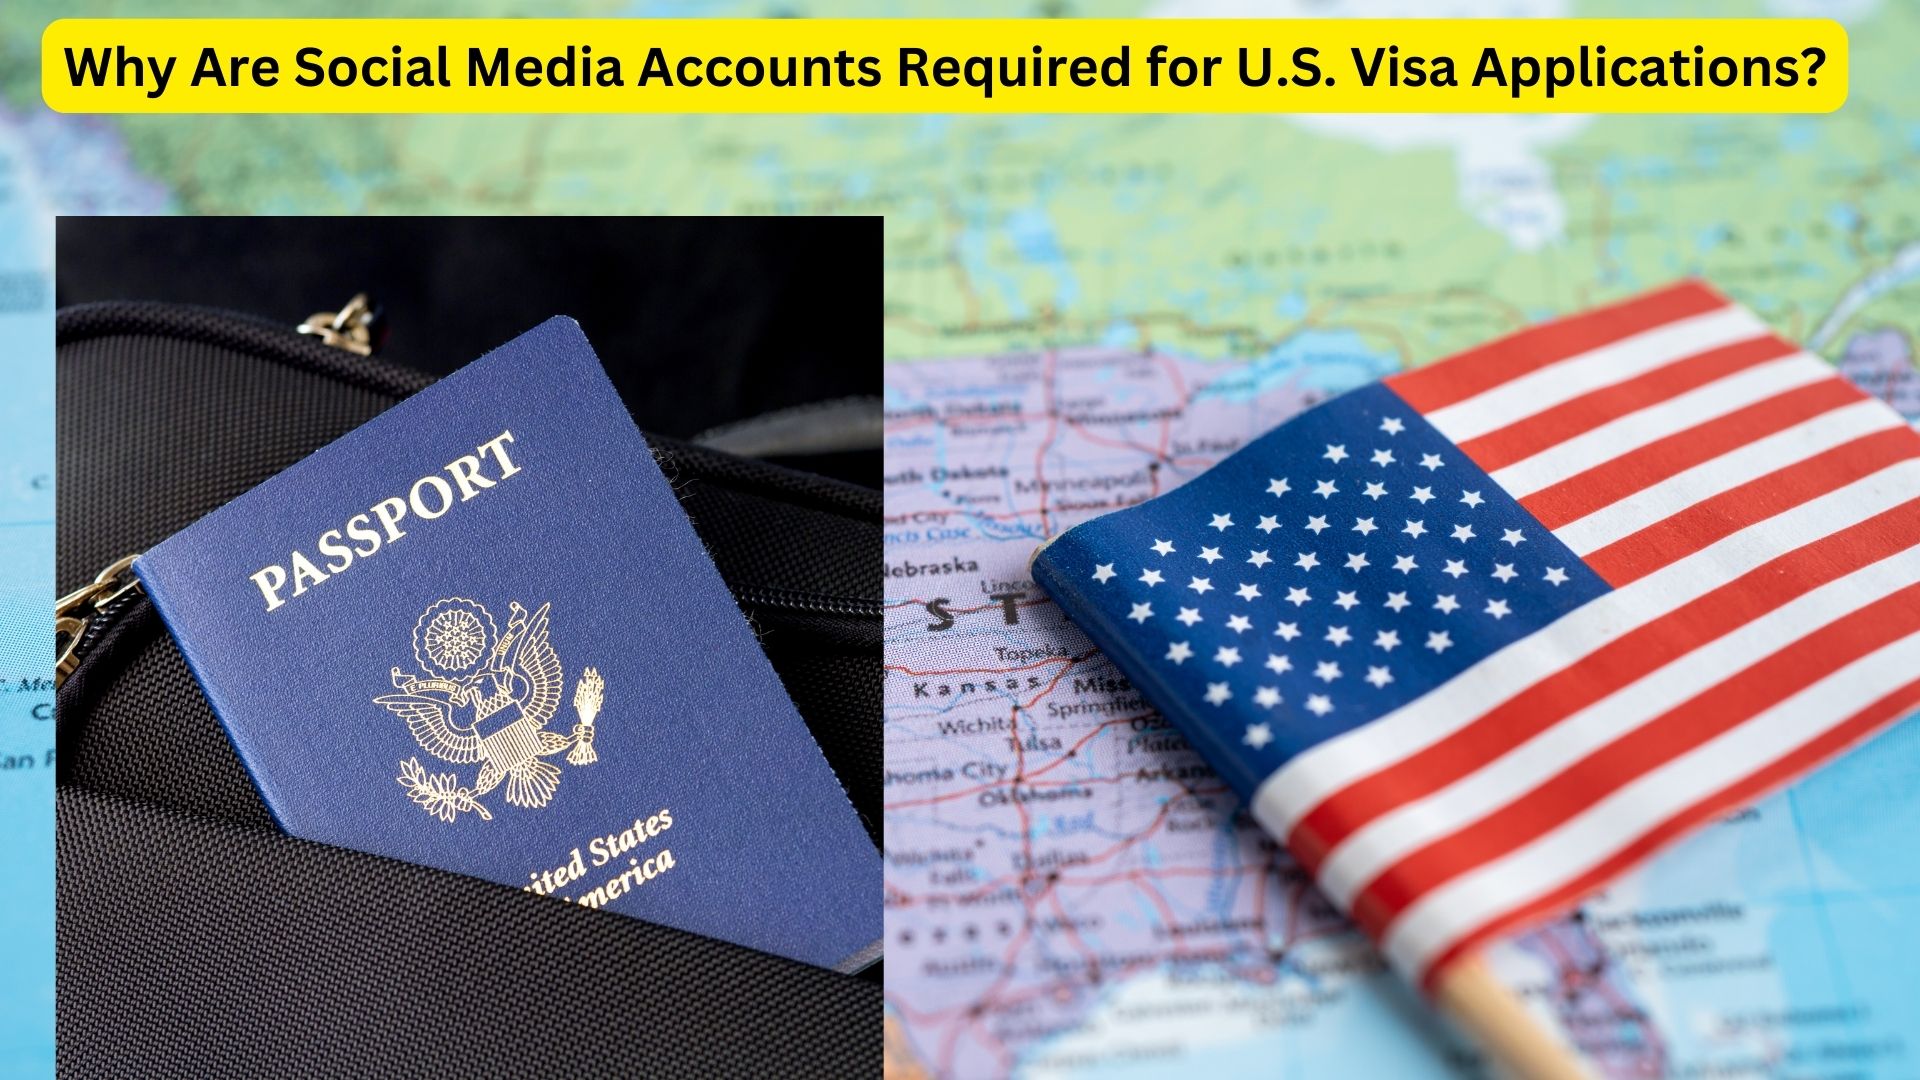 Why Are Social Media Accounts Required for U.S. Visa Applications?